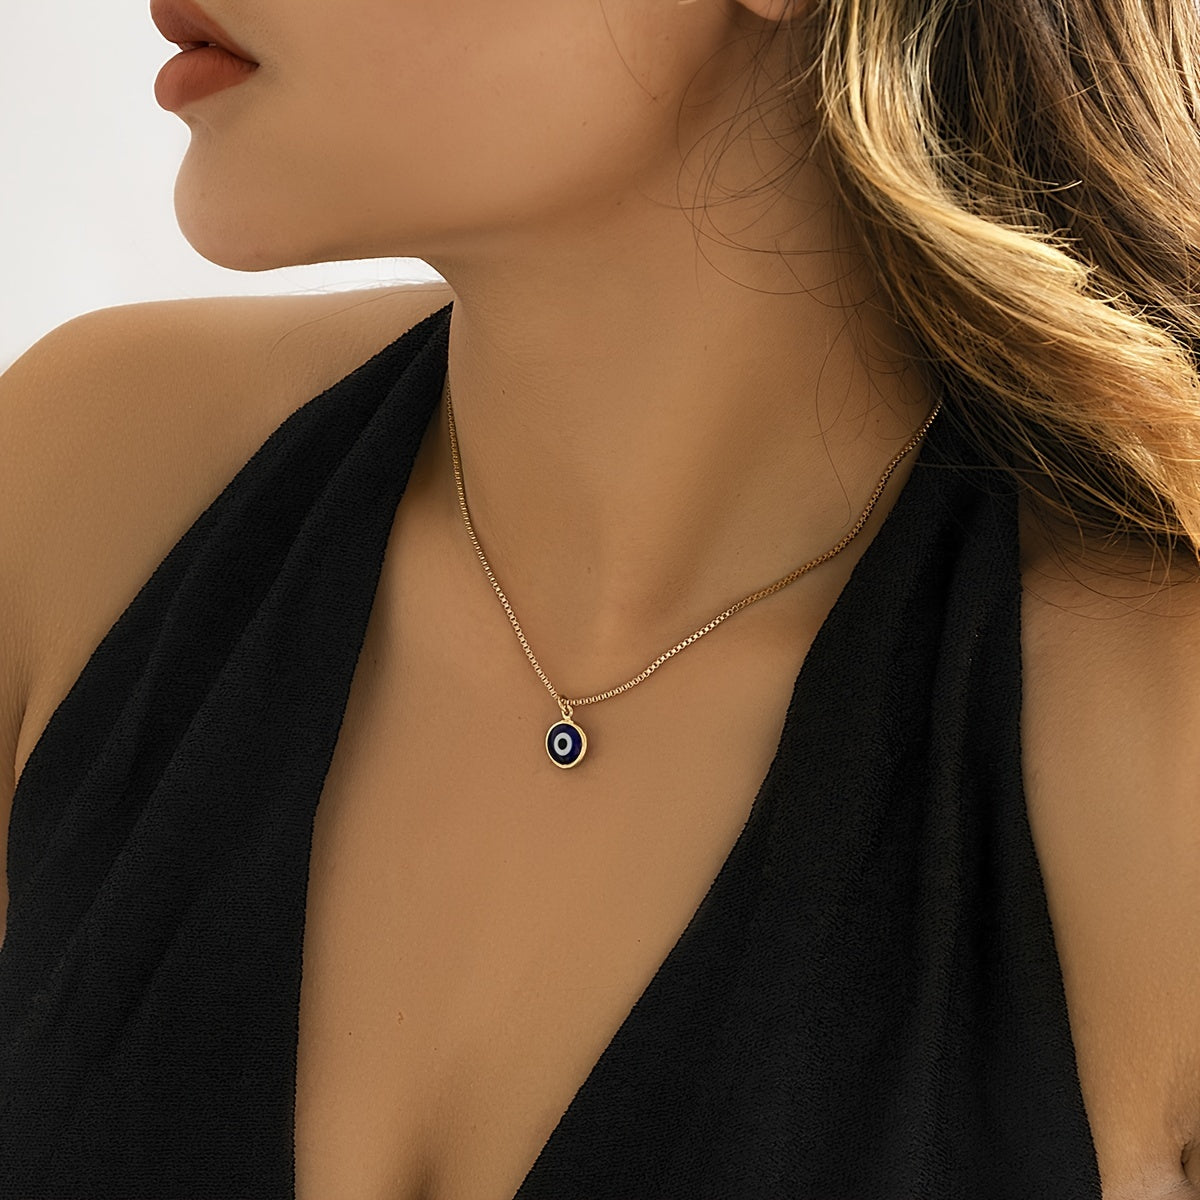 Devil's Eye Shape Pendant Necklace 1 Pc Minimalist Alloy Neck Chain Jewelry Lucky Protection Jewelry Gift